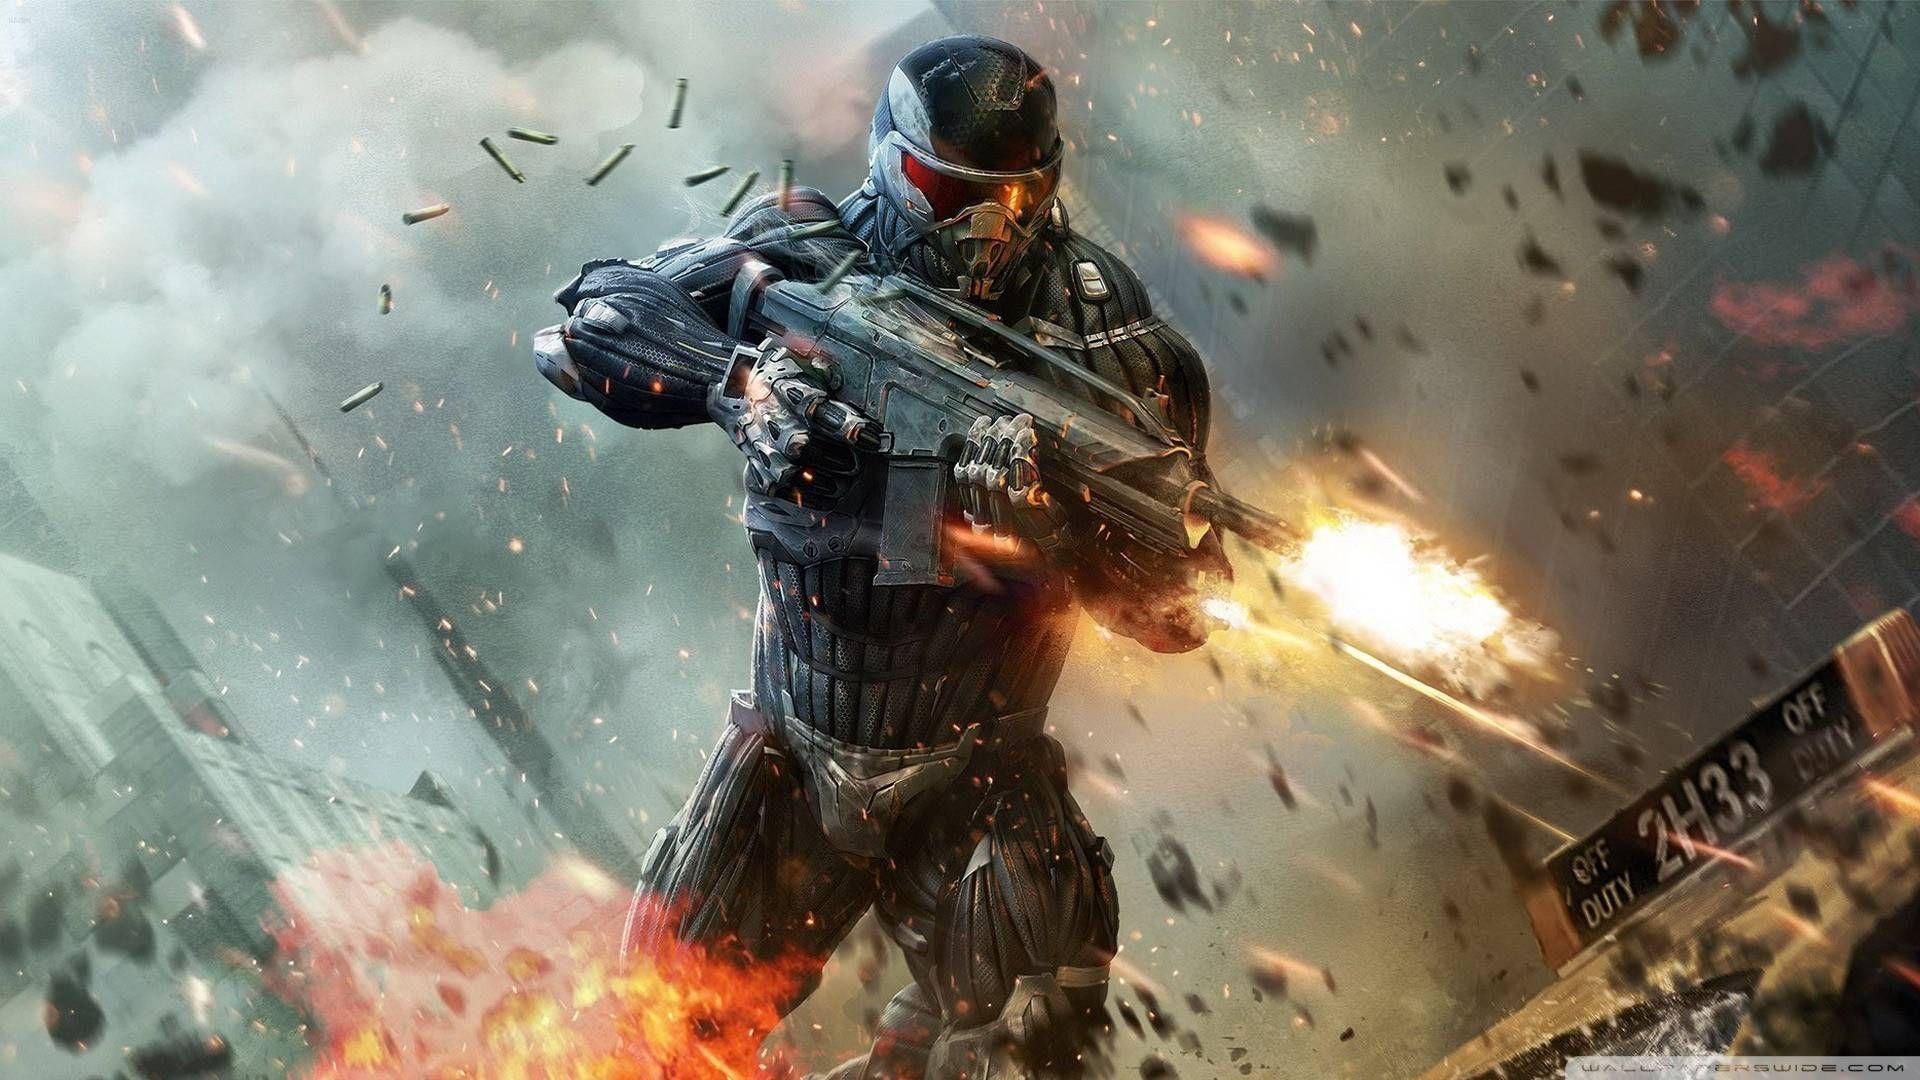 HD Wallpaper Widescreen 1080P 3D. View Full Size. More crysis 2